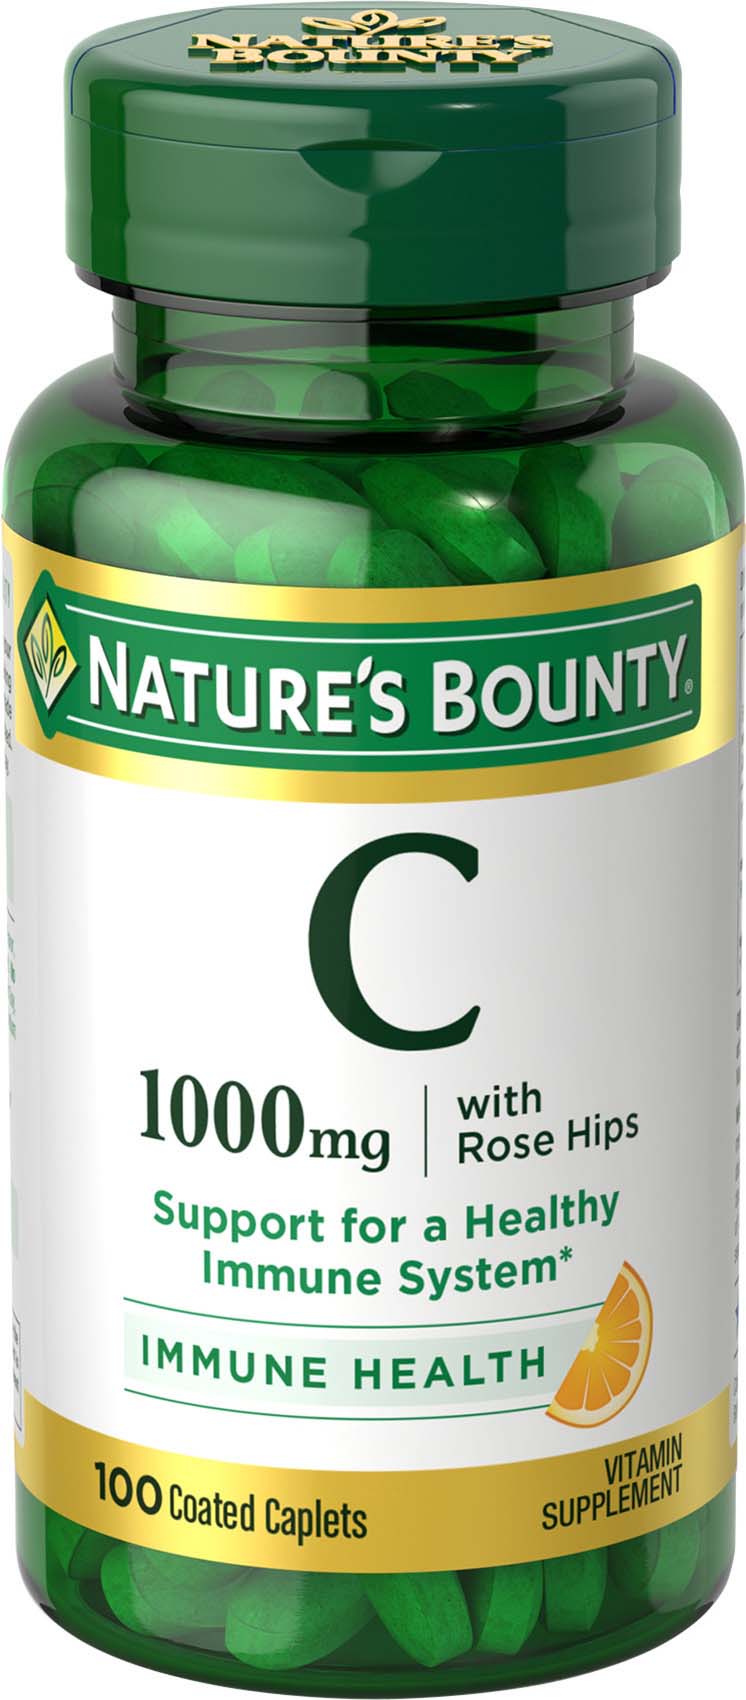 Nature’s Bounty Vitamin C + Rose Hips, 1000mg, 100 Coated Caplets - image 1 of 8